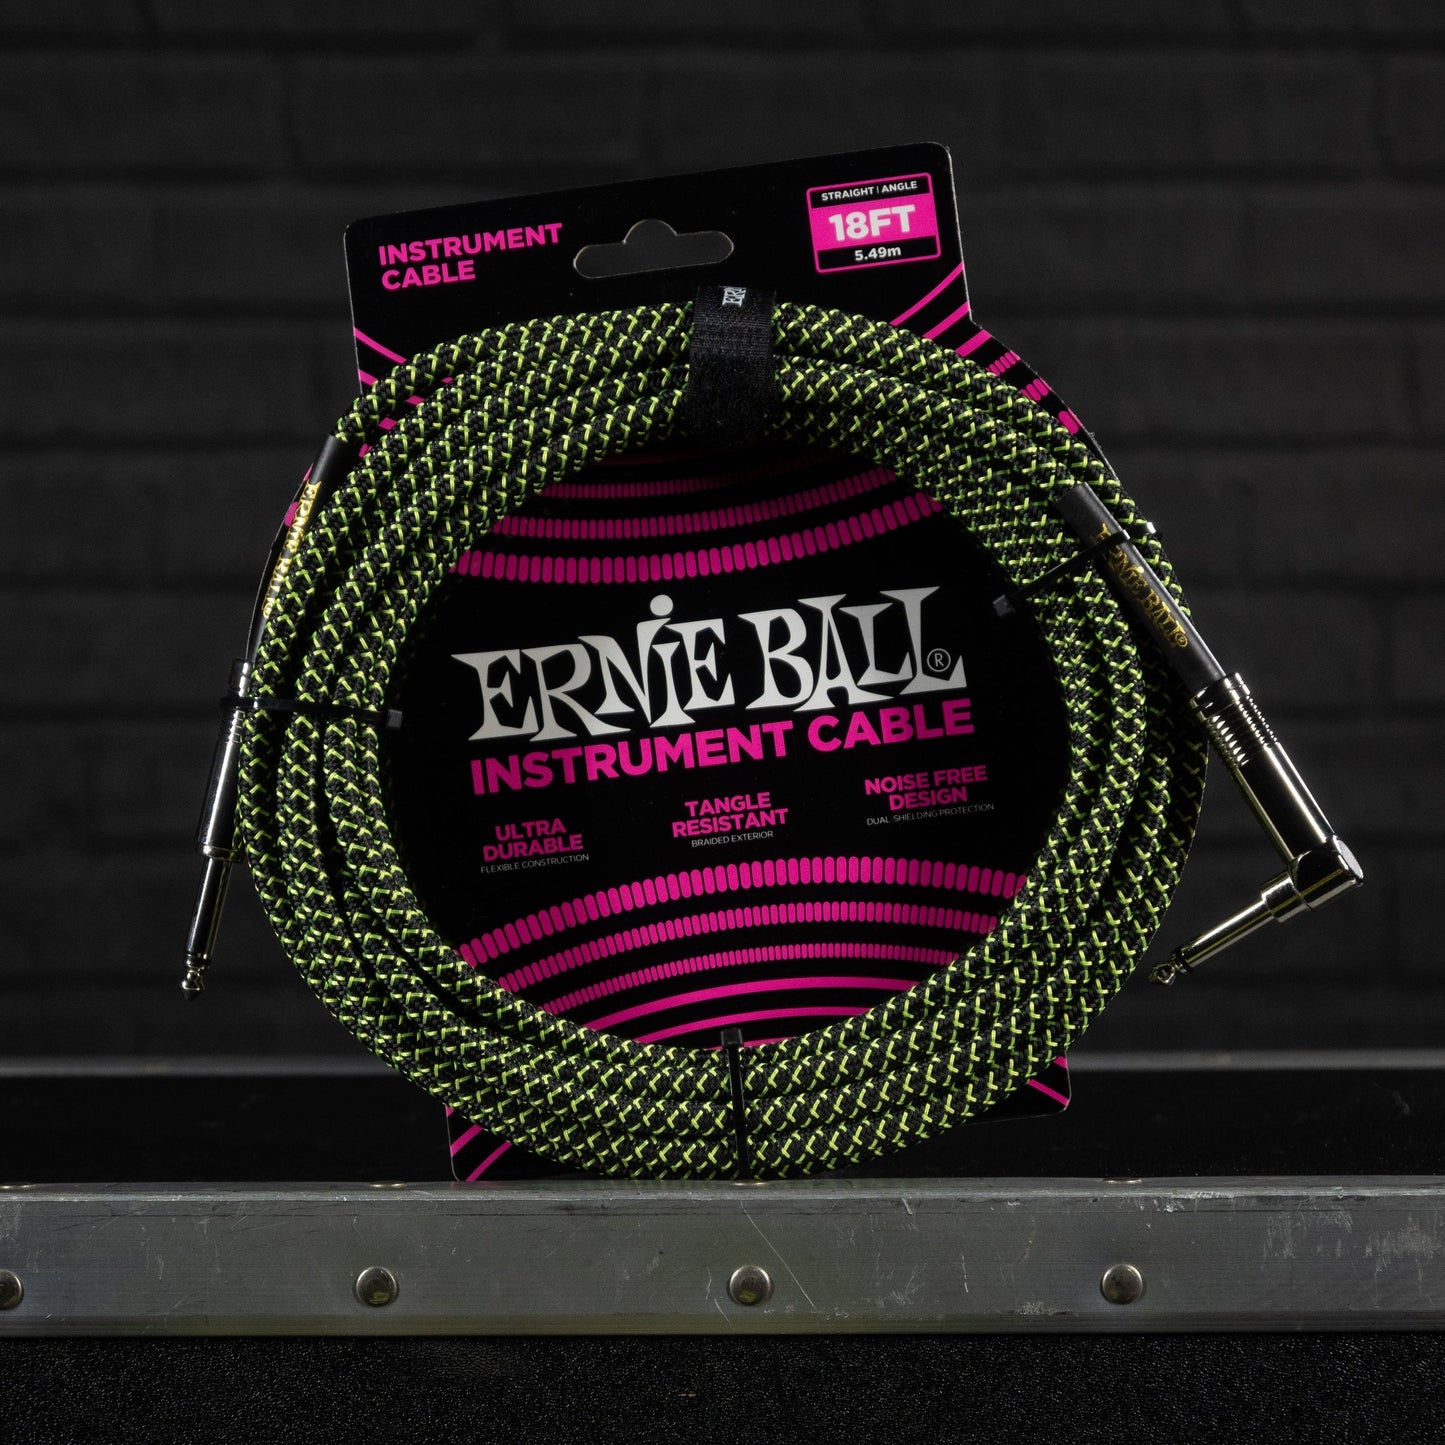 Ernie Ball 18' Straight/Angle Instrument Cable Black/Green - Impulse Music Co.